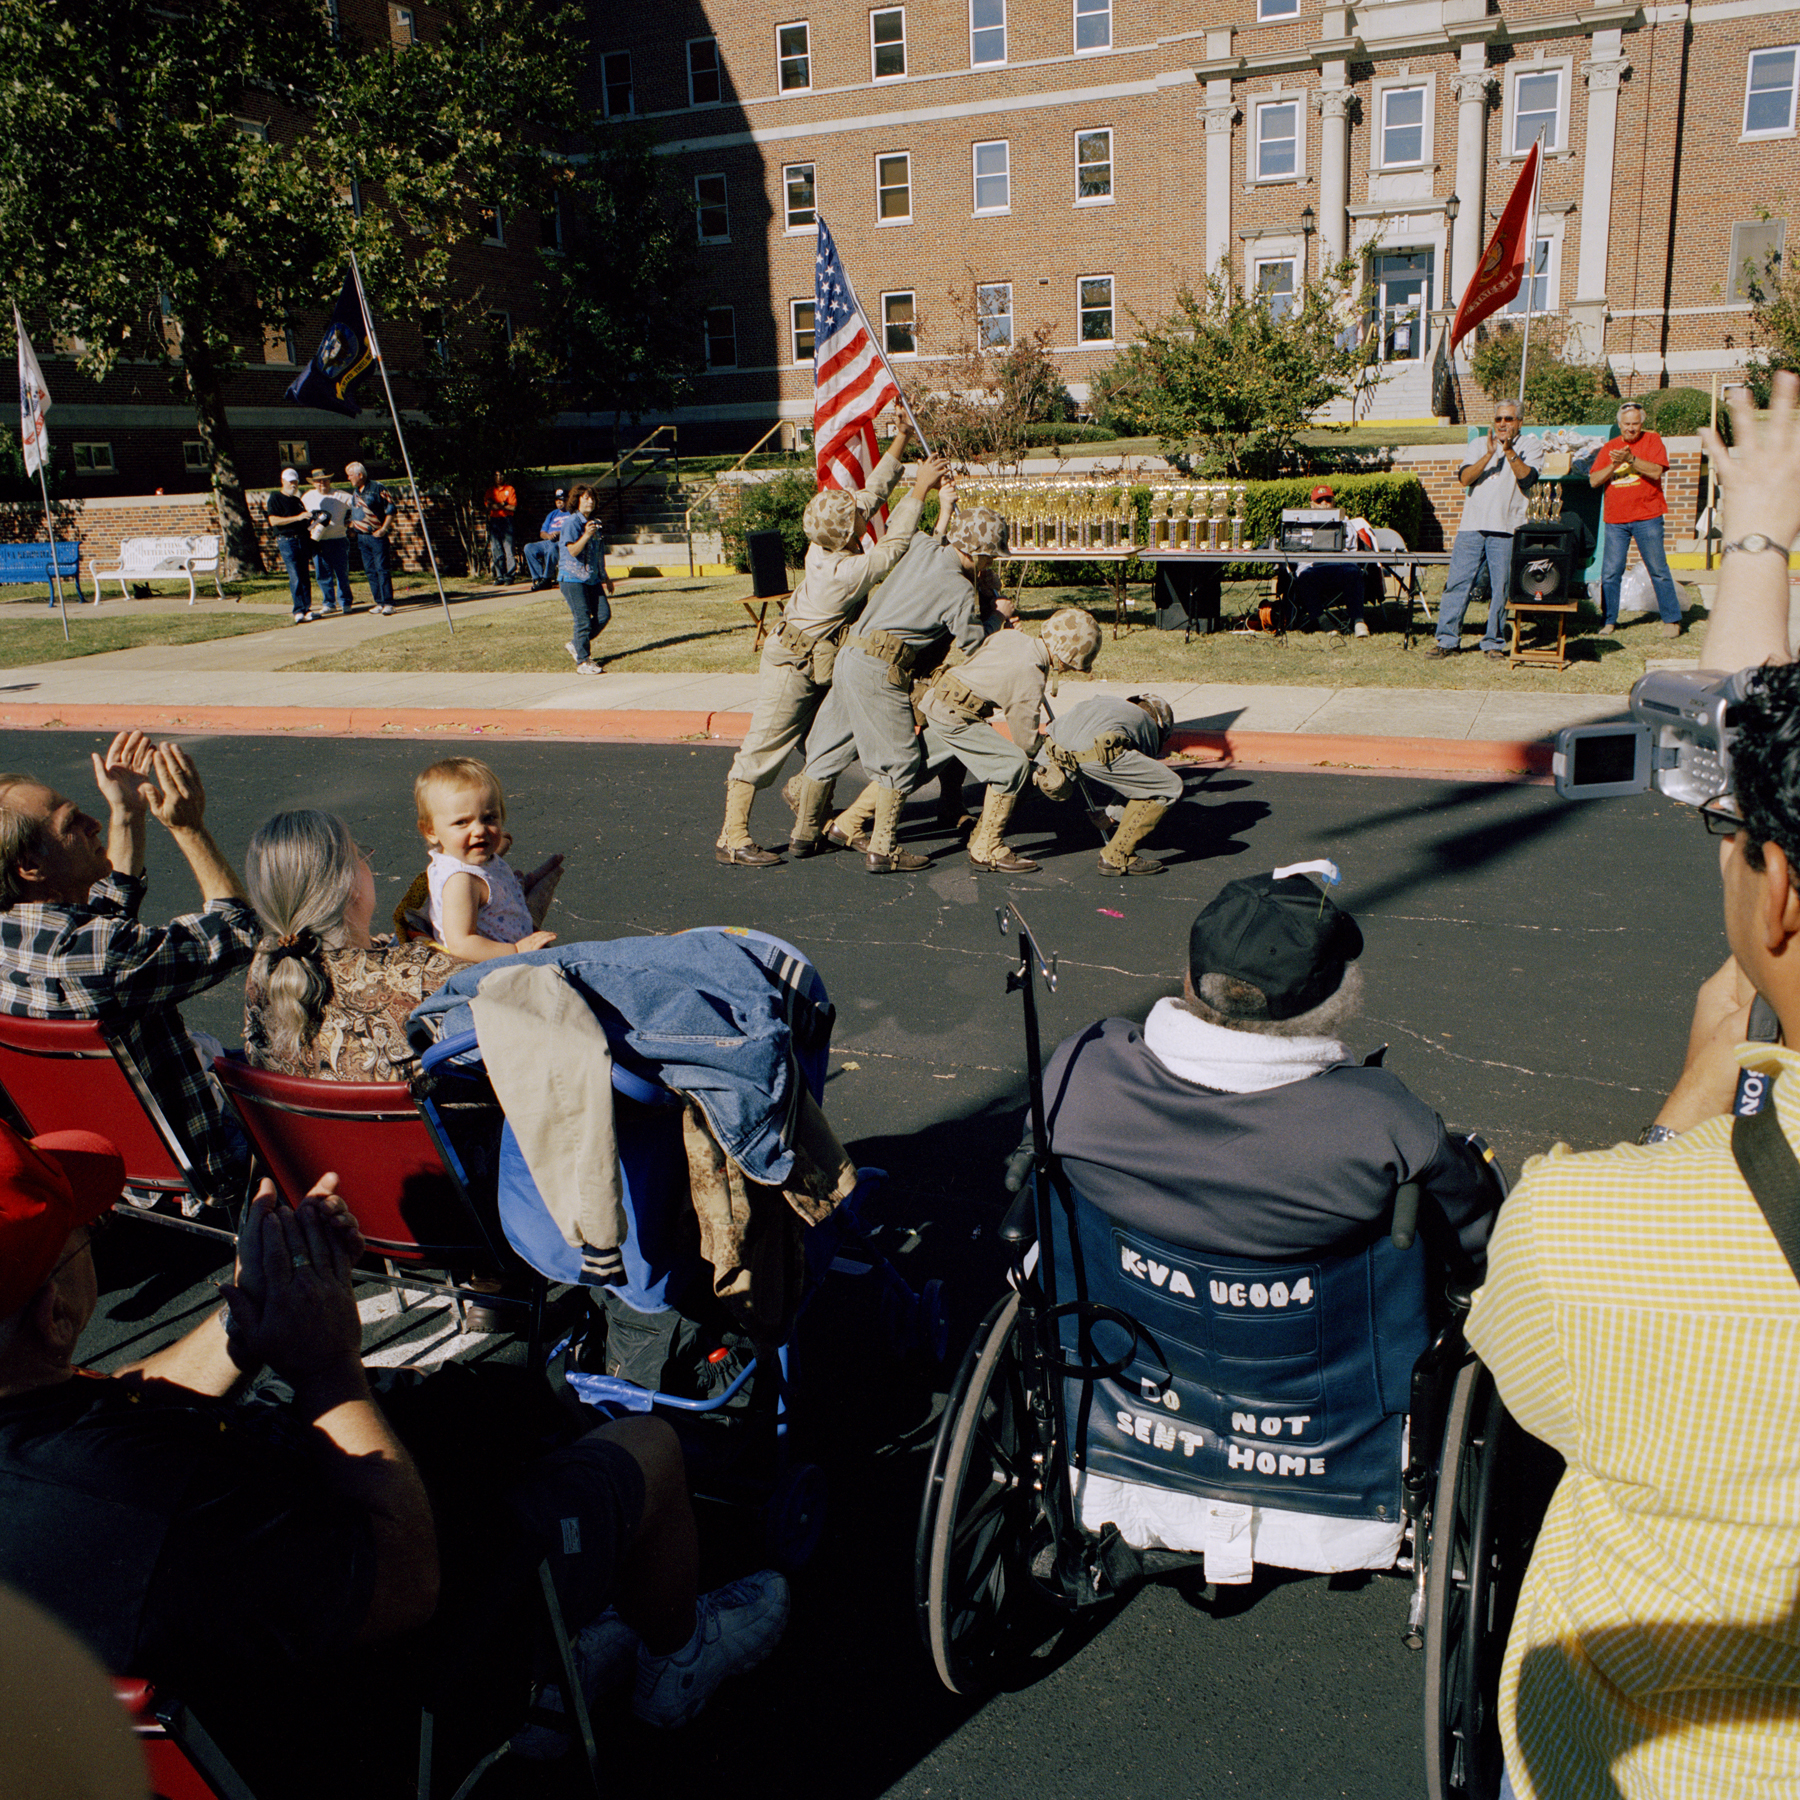 A veteran's day parade in Texas in the mid-2000s